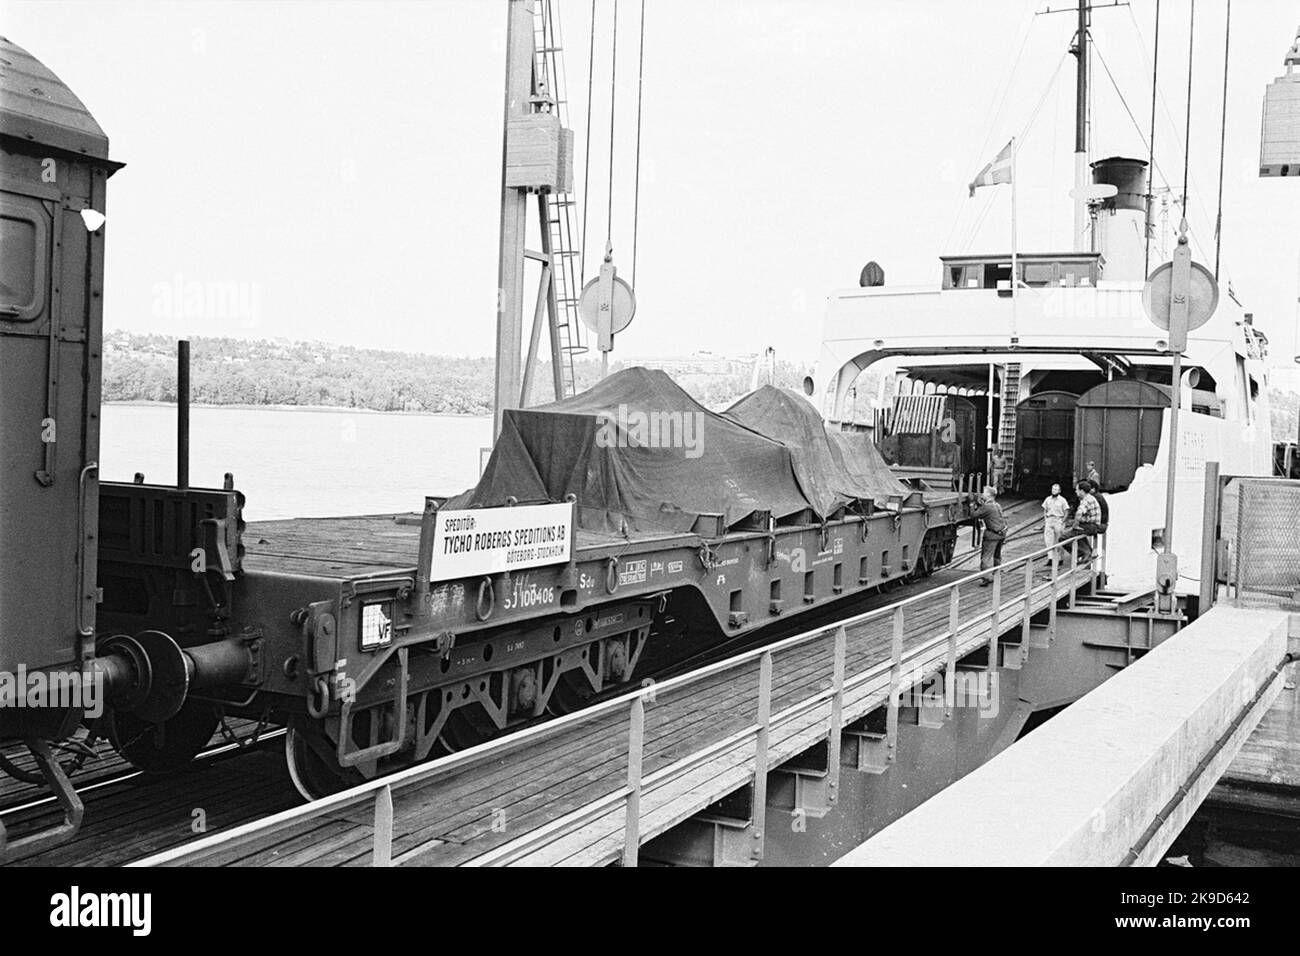 The State Railways, SJ SDU 100406. The train ferry S/S Starke, Trelleborg in Värtahamnen. The ferry was built in 1931 by Deutsche Werke, Kiel, Germany and delivered to the State Railways, SJ, Malmö. Has mainly operated the trail Trelleborg - Sassnitz. Inserted in 1967 on the new train ferry trail between Värtahamnen in Stockholm and Naantali outside Turku Stock Photo